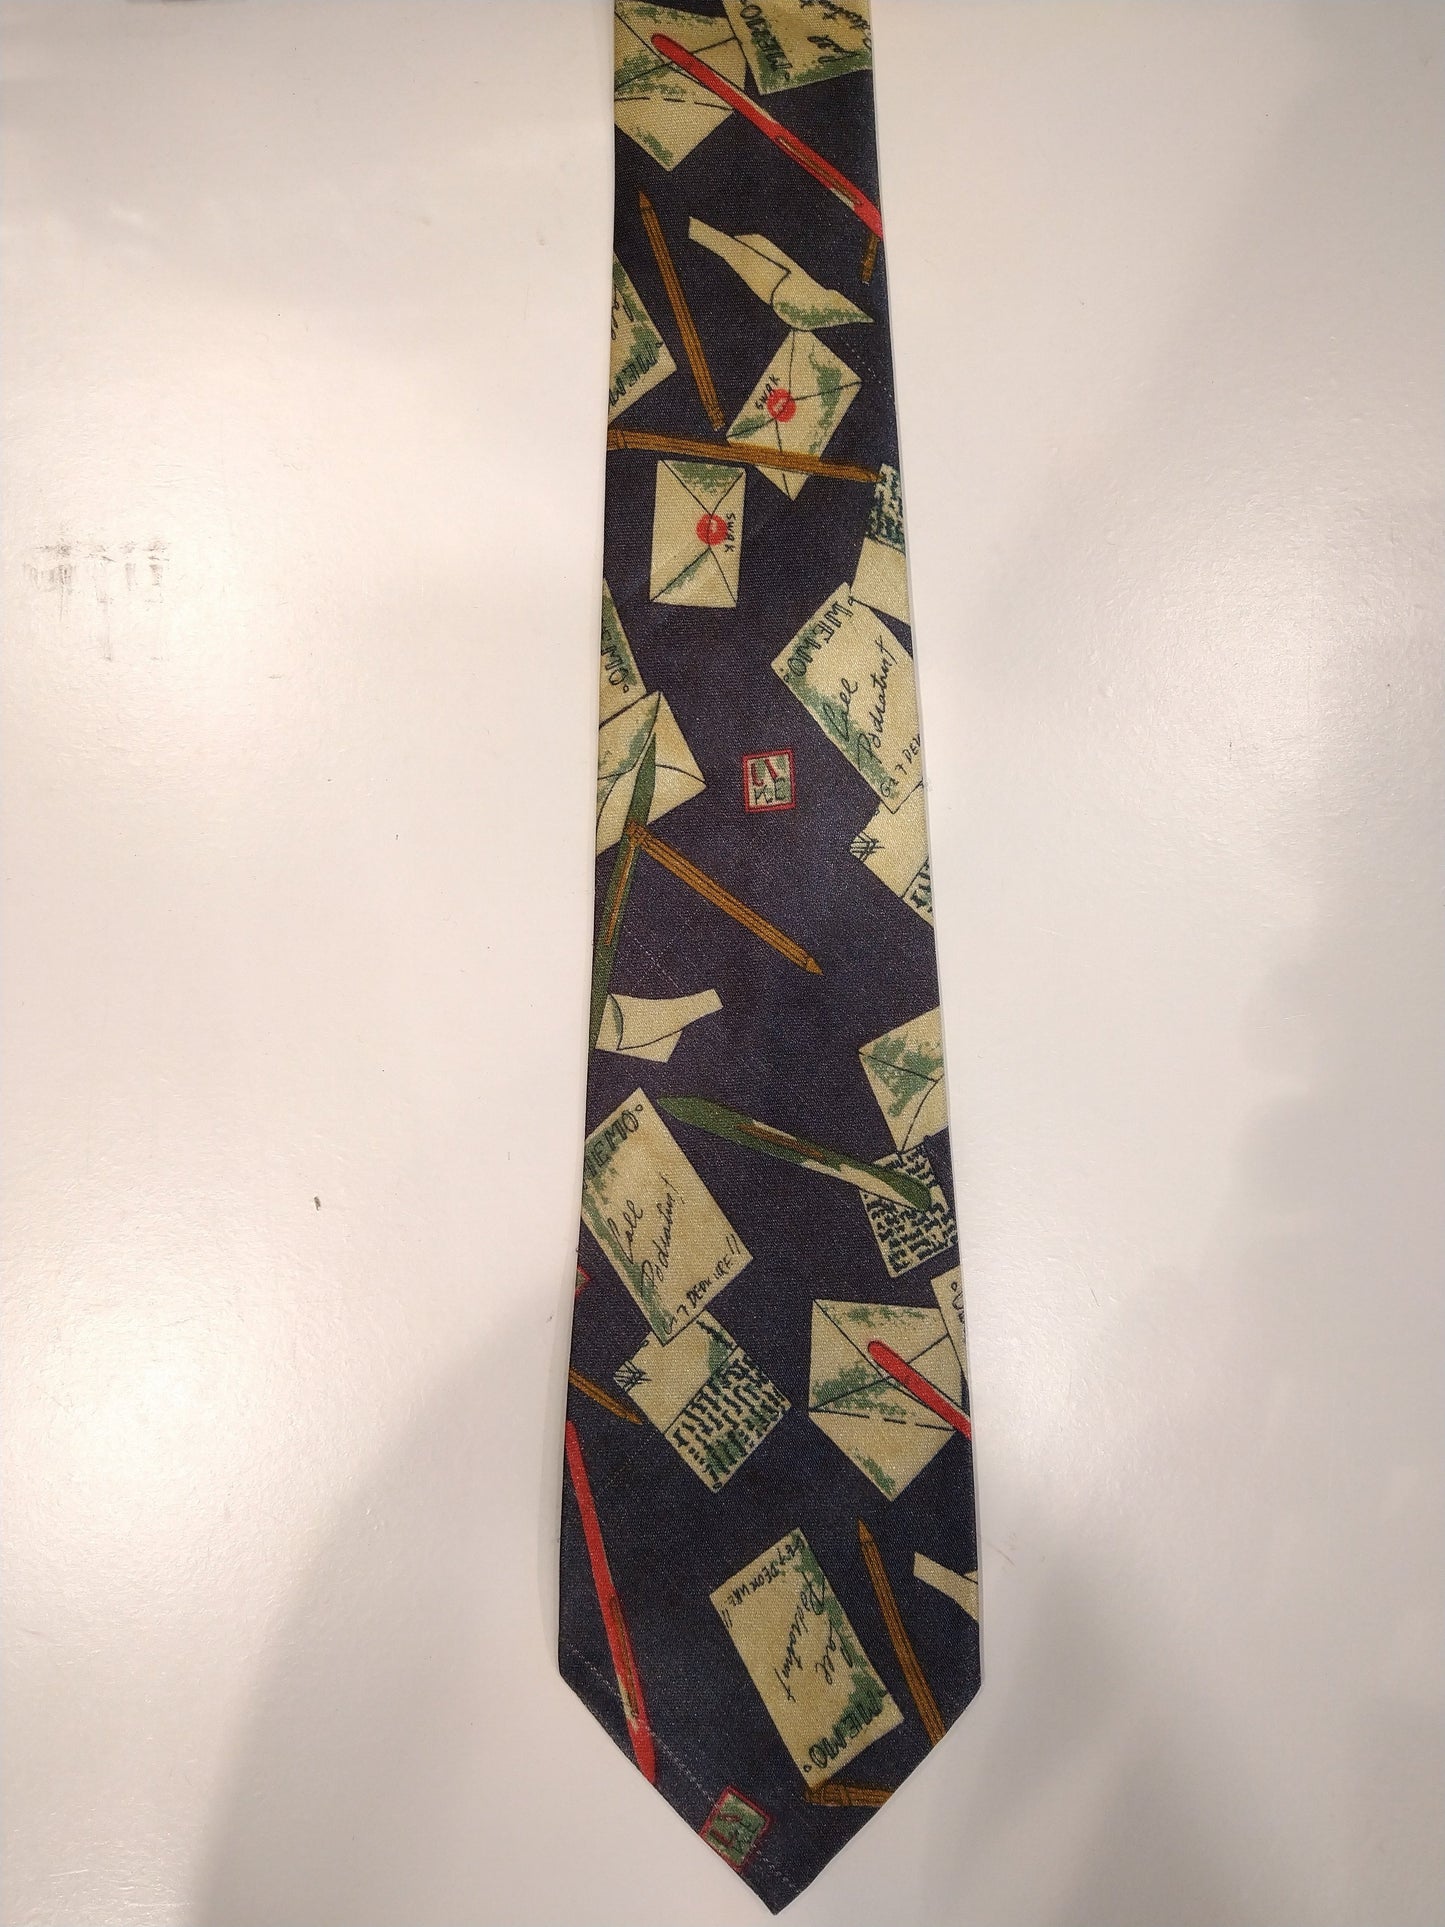 Bellini polyester tie. Colorful motif.